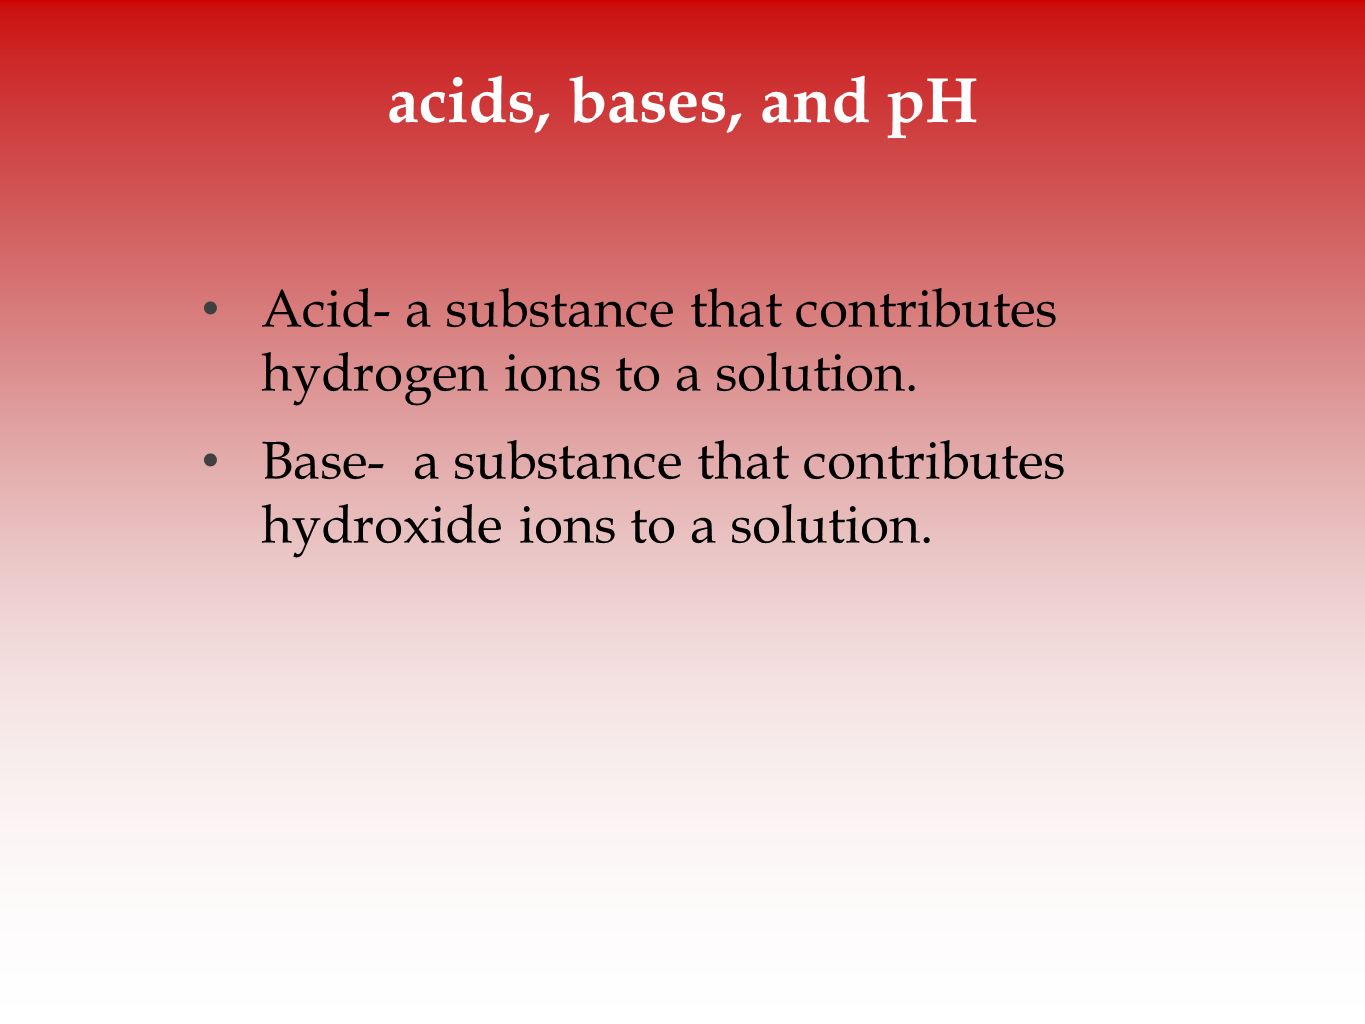 acids, bases, and pH Acid- a substance that contributes hydrogen ions to a solution.